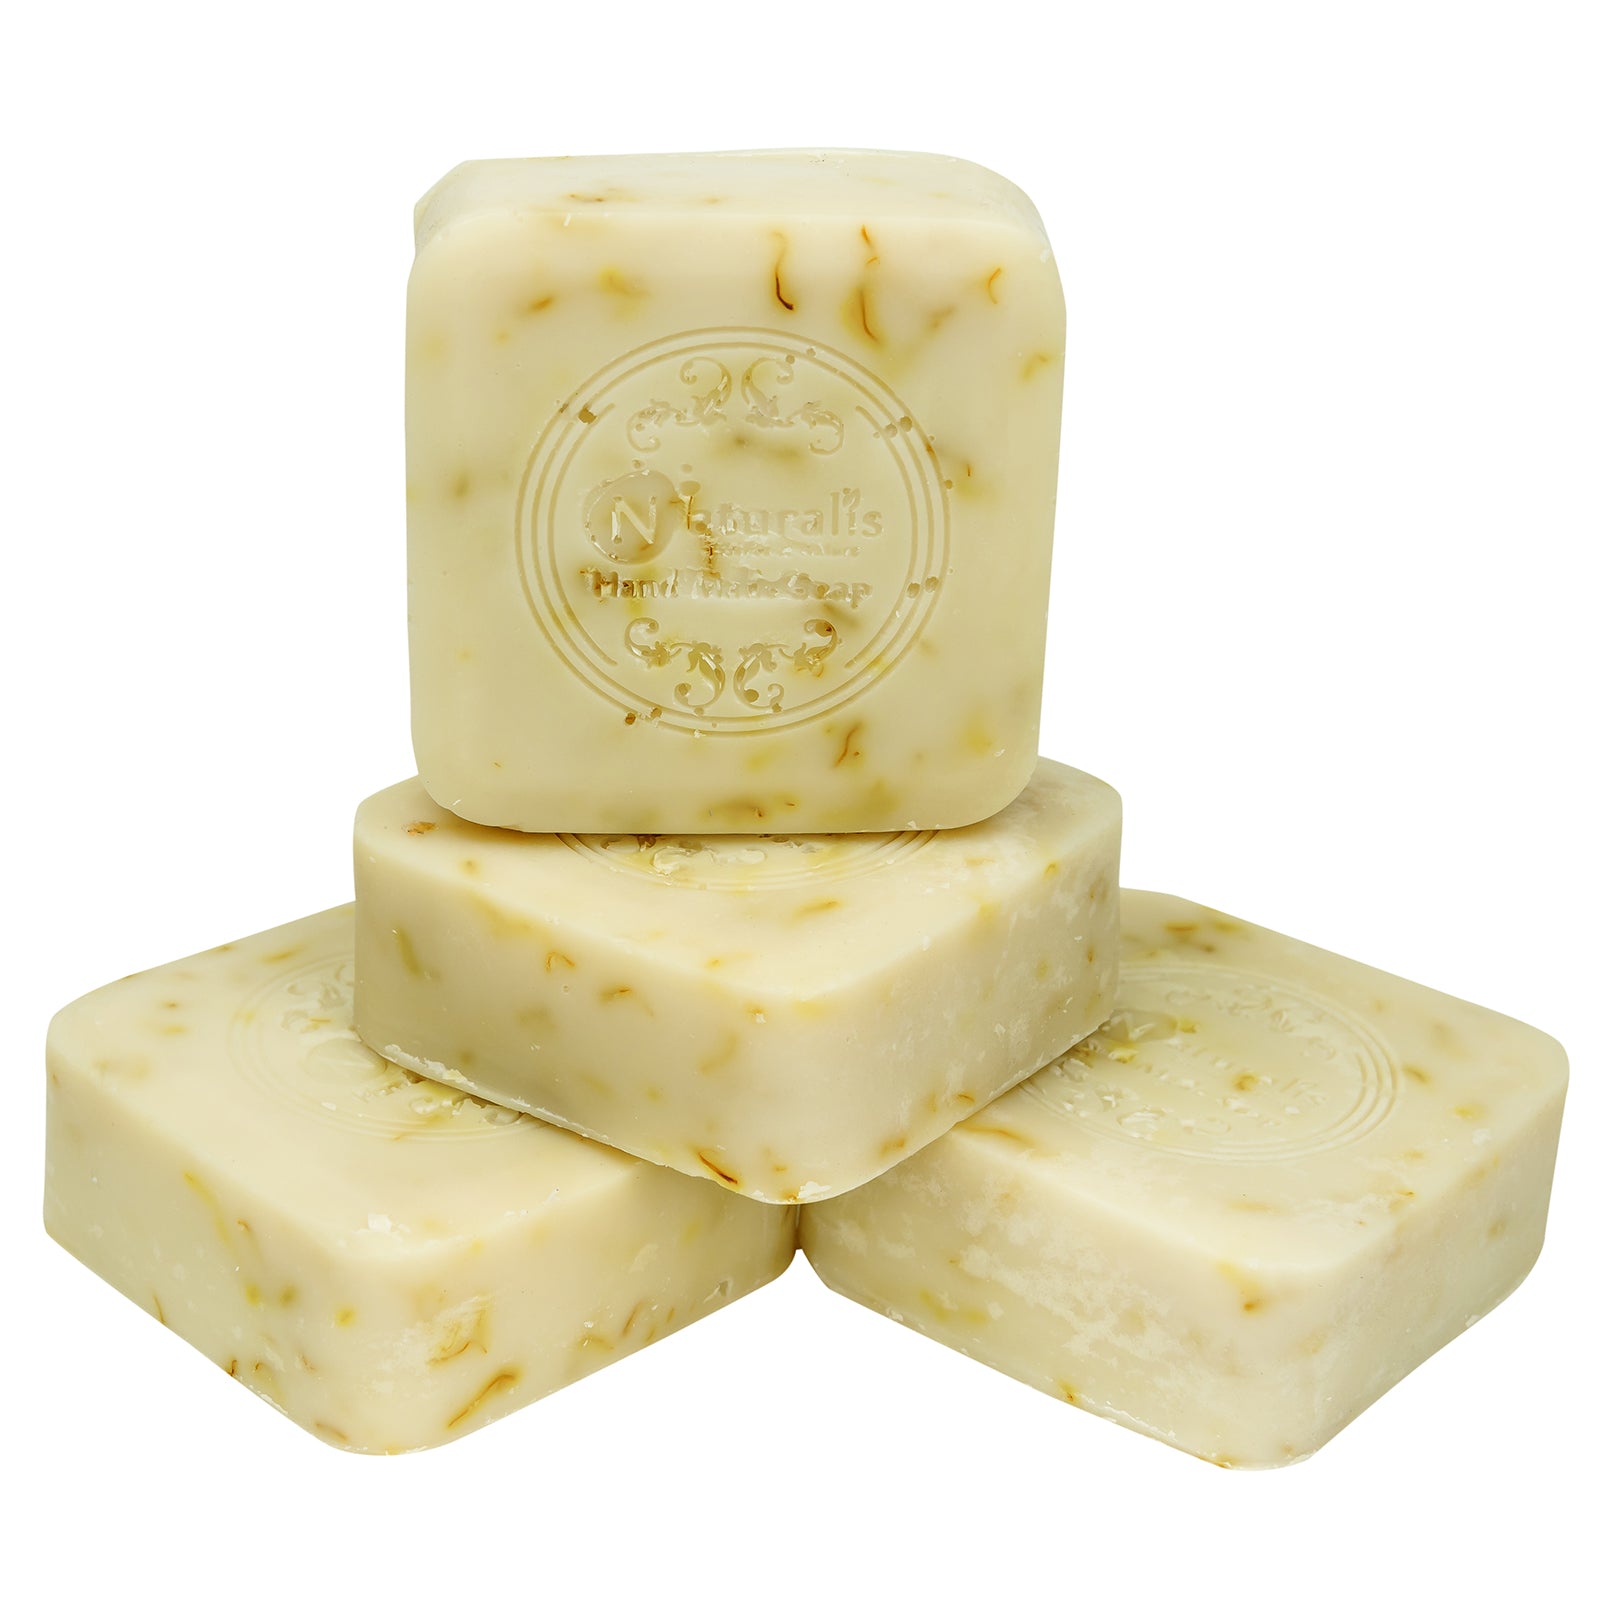 Hand-Milled Luxury Haldi Chandan Kesar Solid Soap Bar, Made using century-old Cold Process Method - 100gms Pack of 4